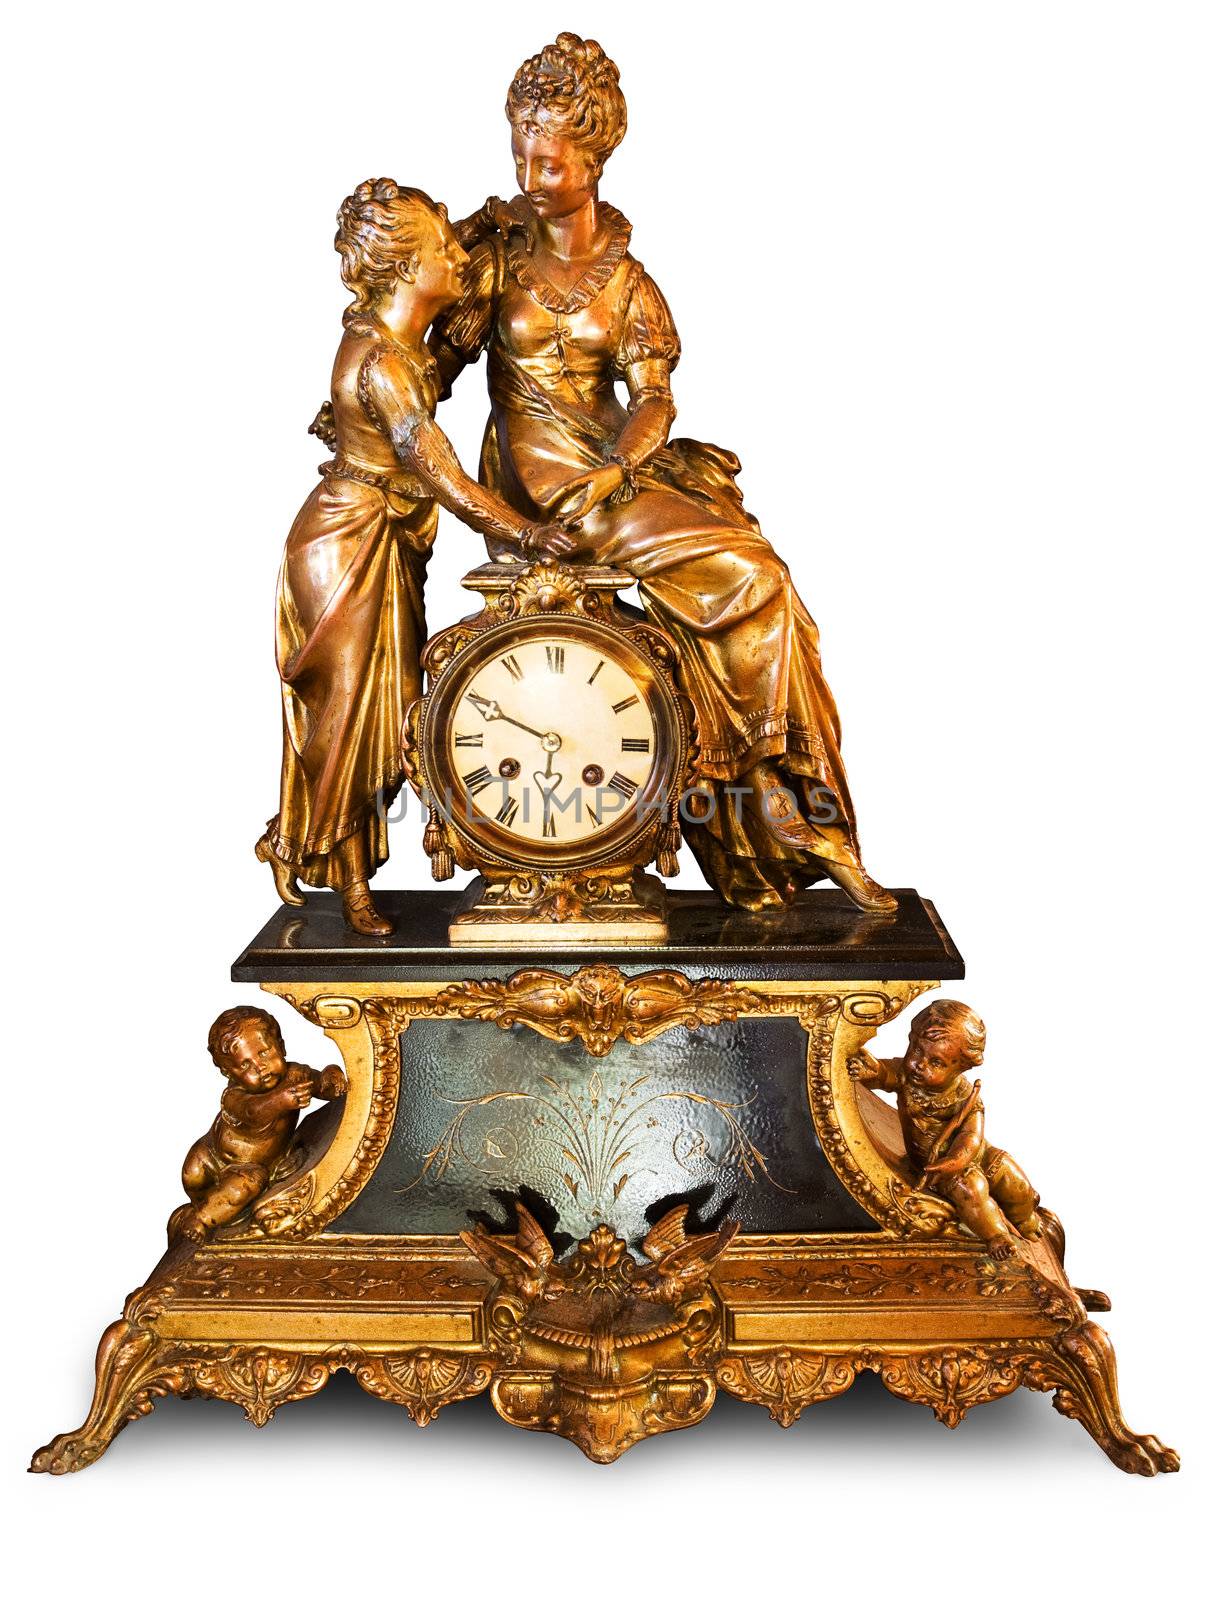 Antique clock with figurines of cupids and women isolated on white background. Clipping path included to easy remove object shadow or replace background.